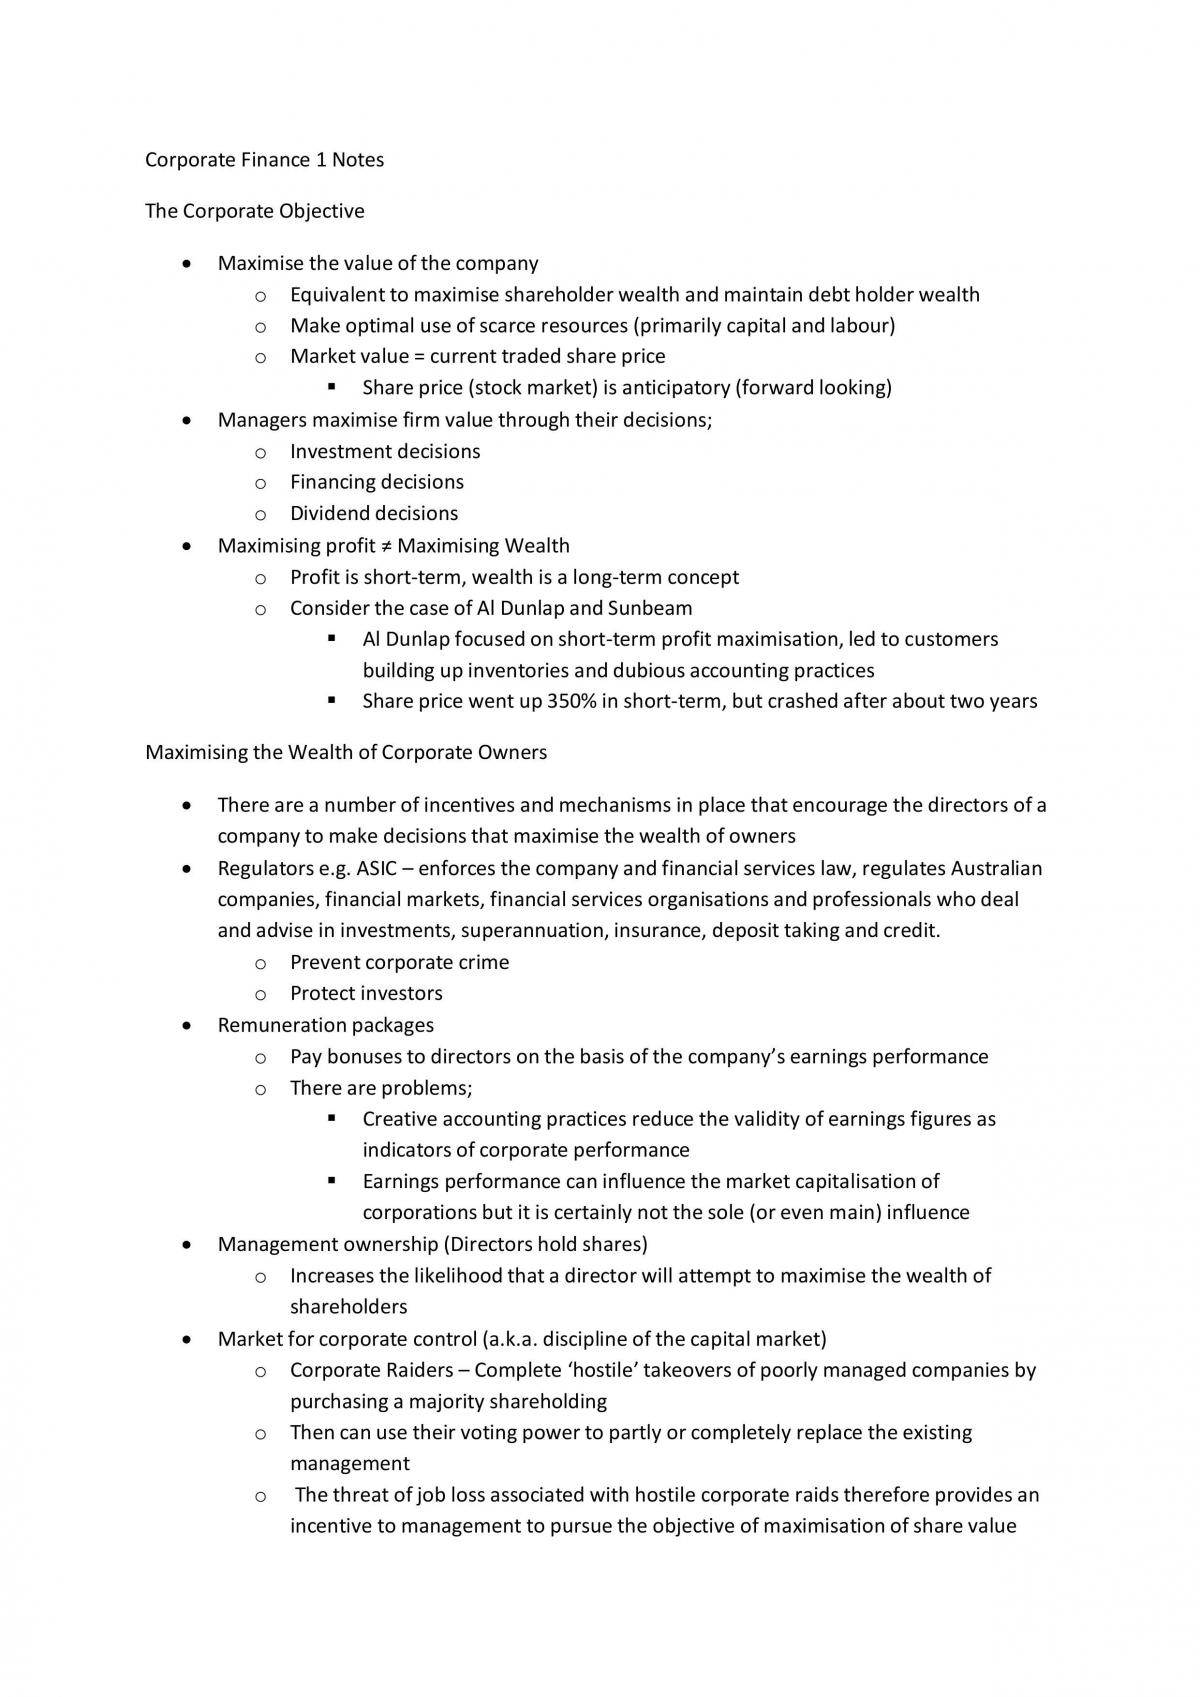 Corporate Finance 1 Notes - Page 1